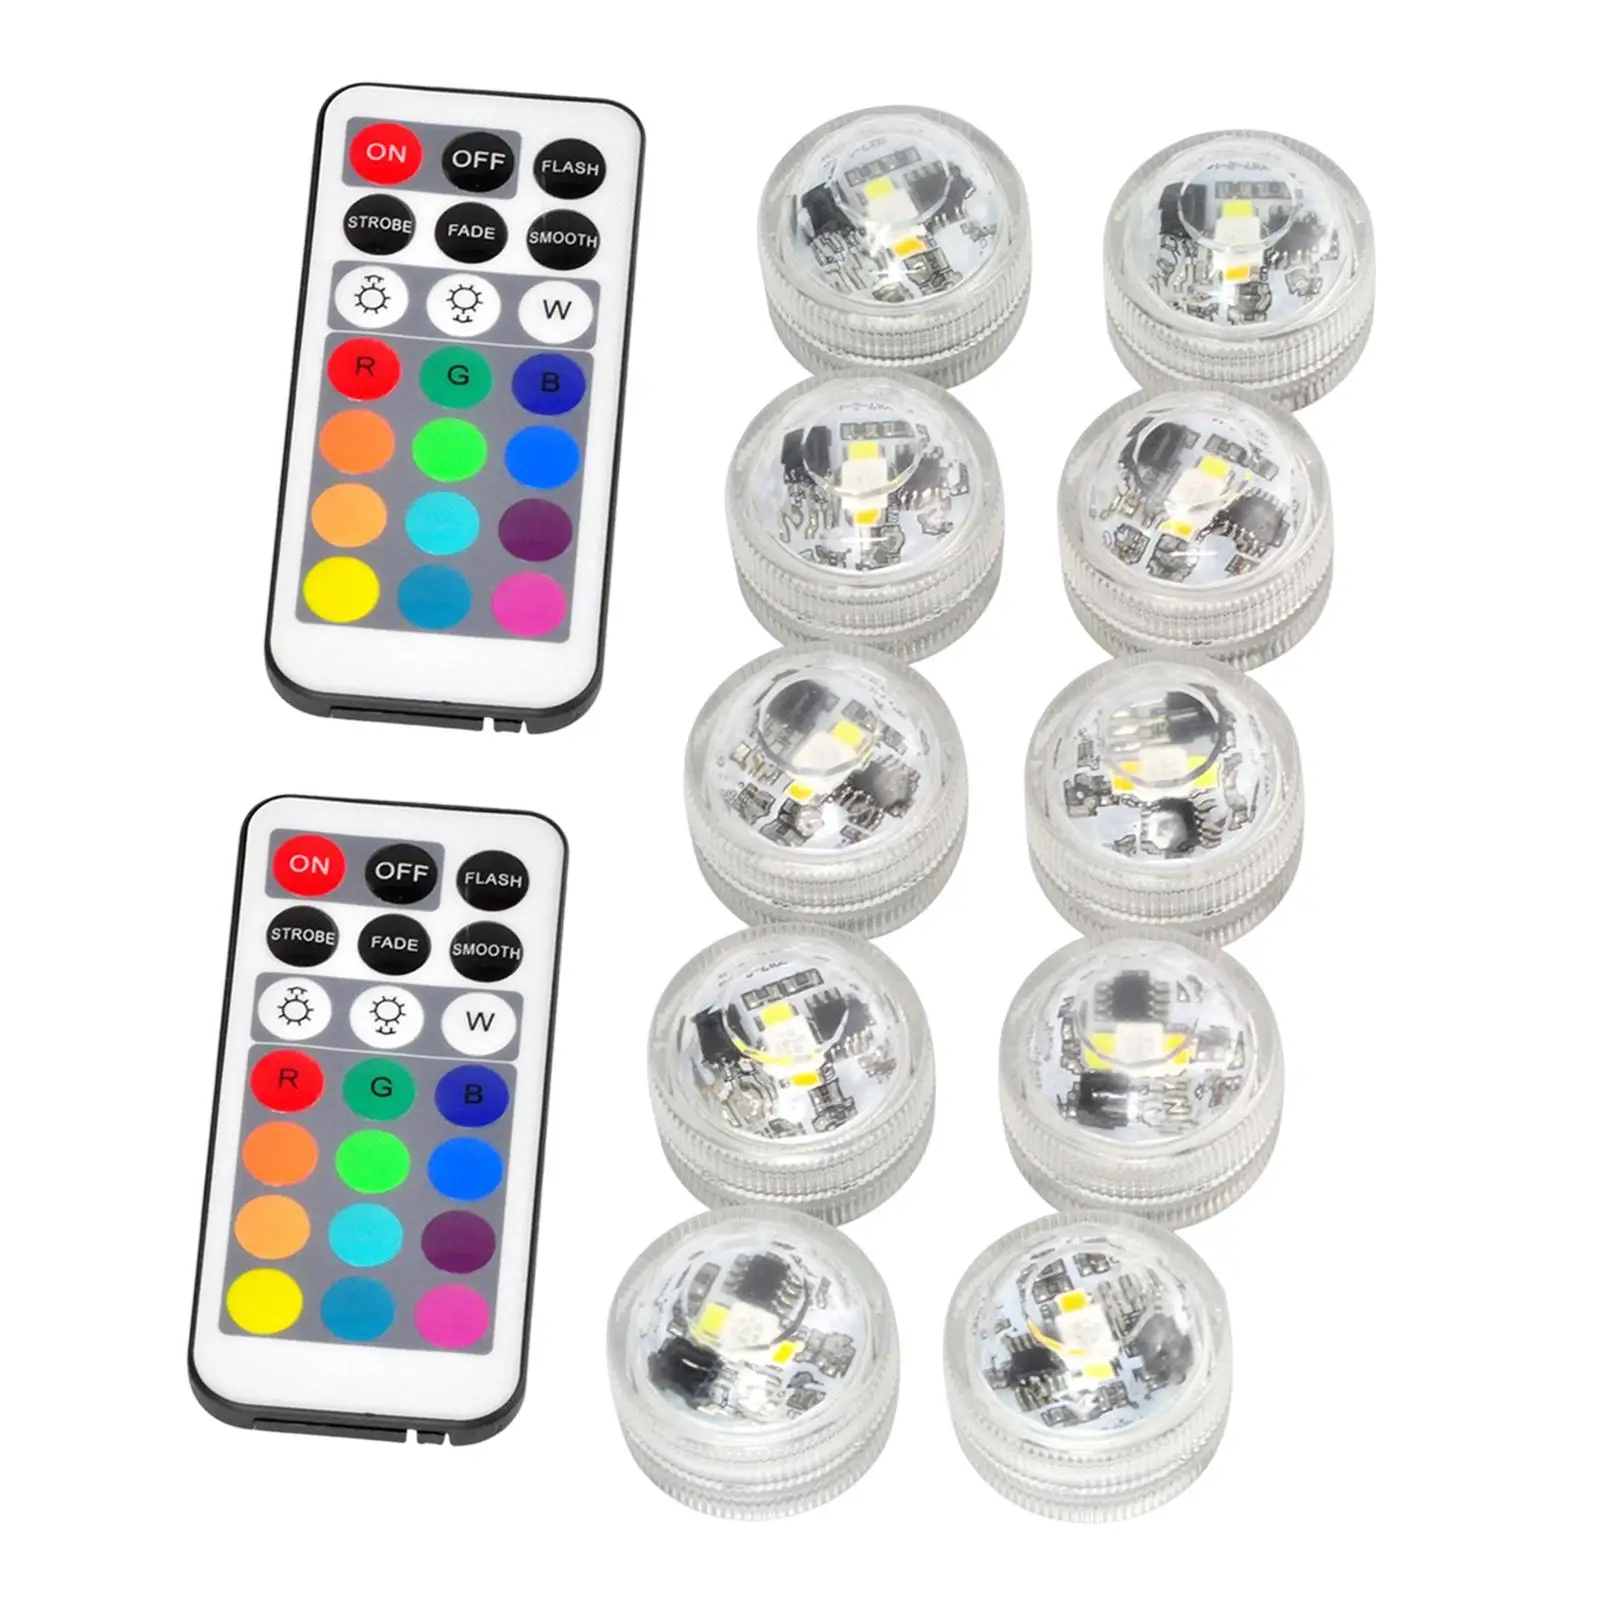 10x LED Lights Submersible Remote Control RGB Lamp Fountains Hot Tub